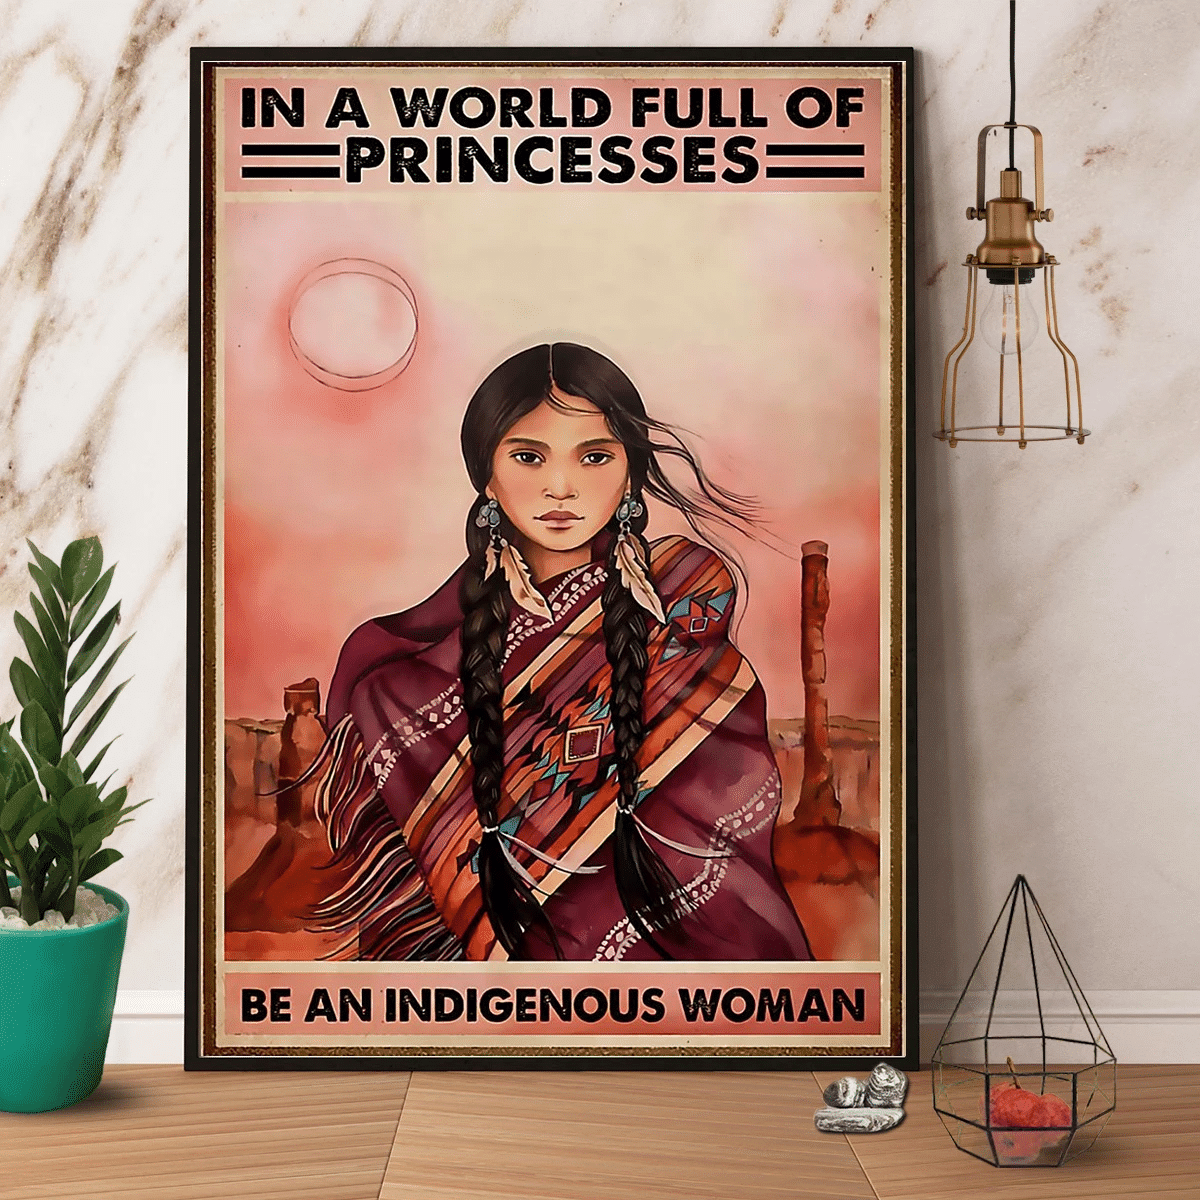 Woman Native American In Sa World Full Of Princesses Be An Indigenous Vertical Paper Poster Canvas Wall Decor